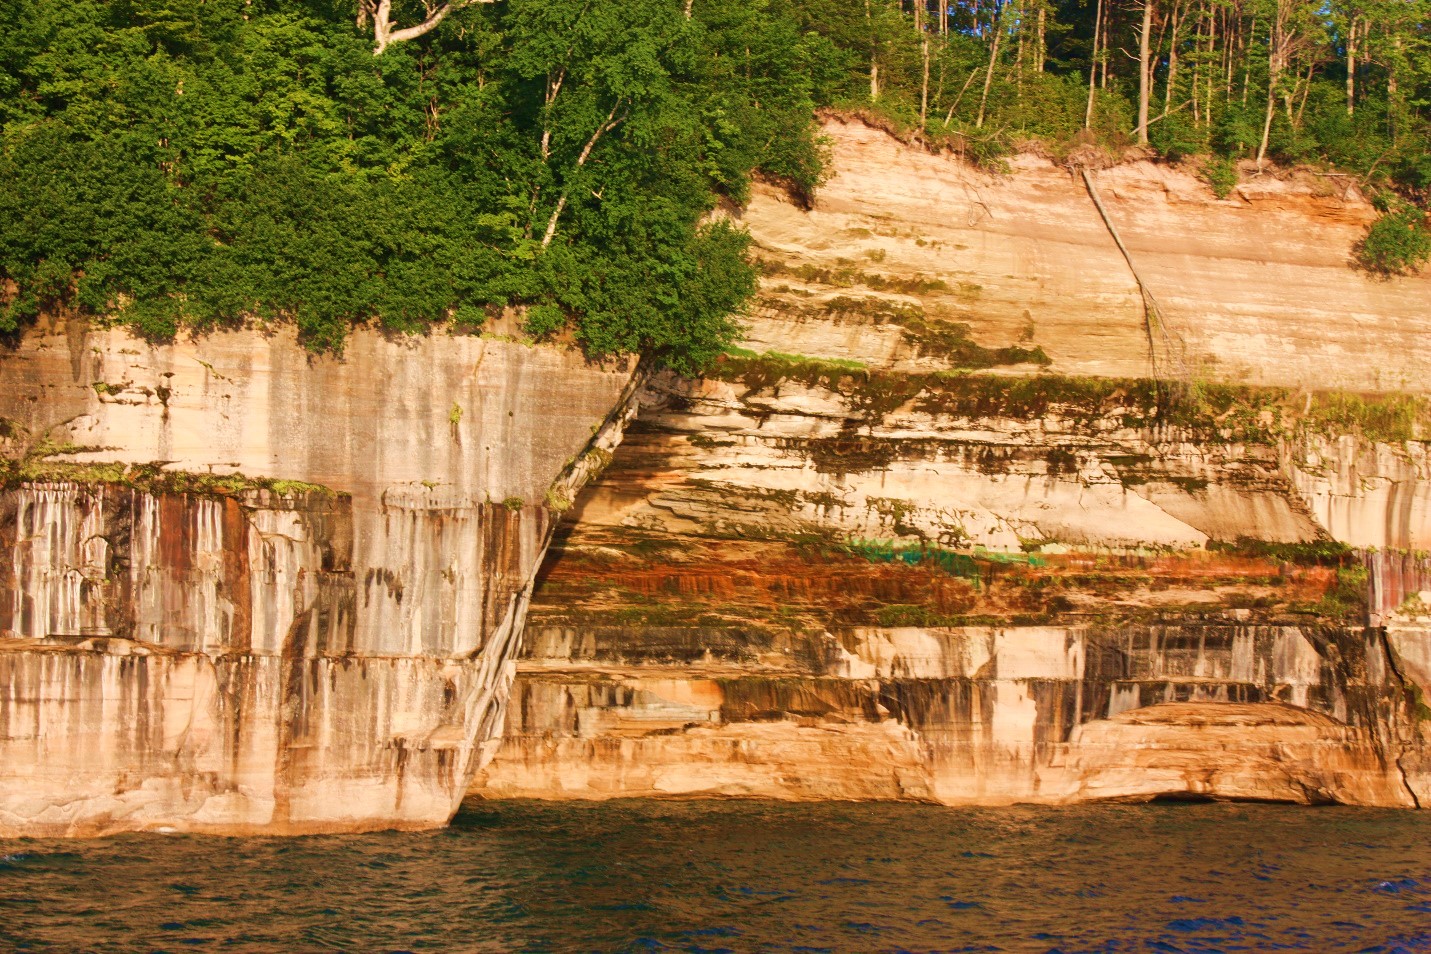 What are the Pictured Rocks?